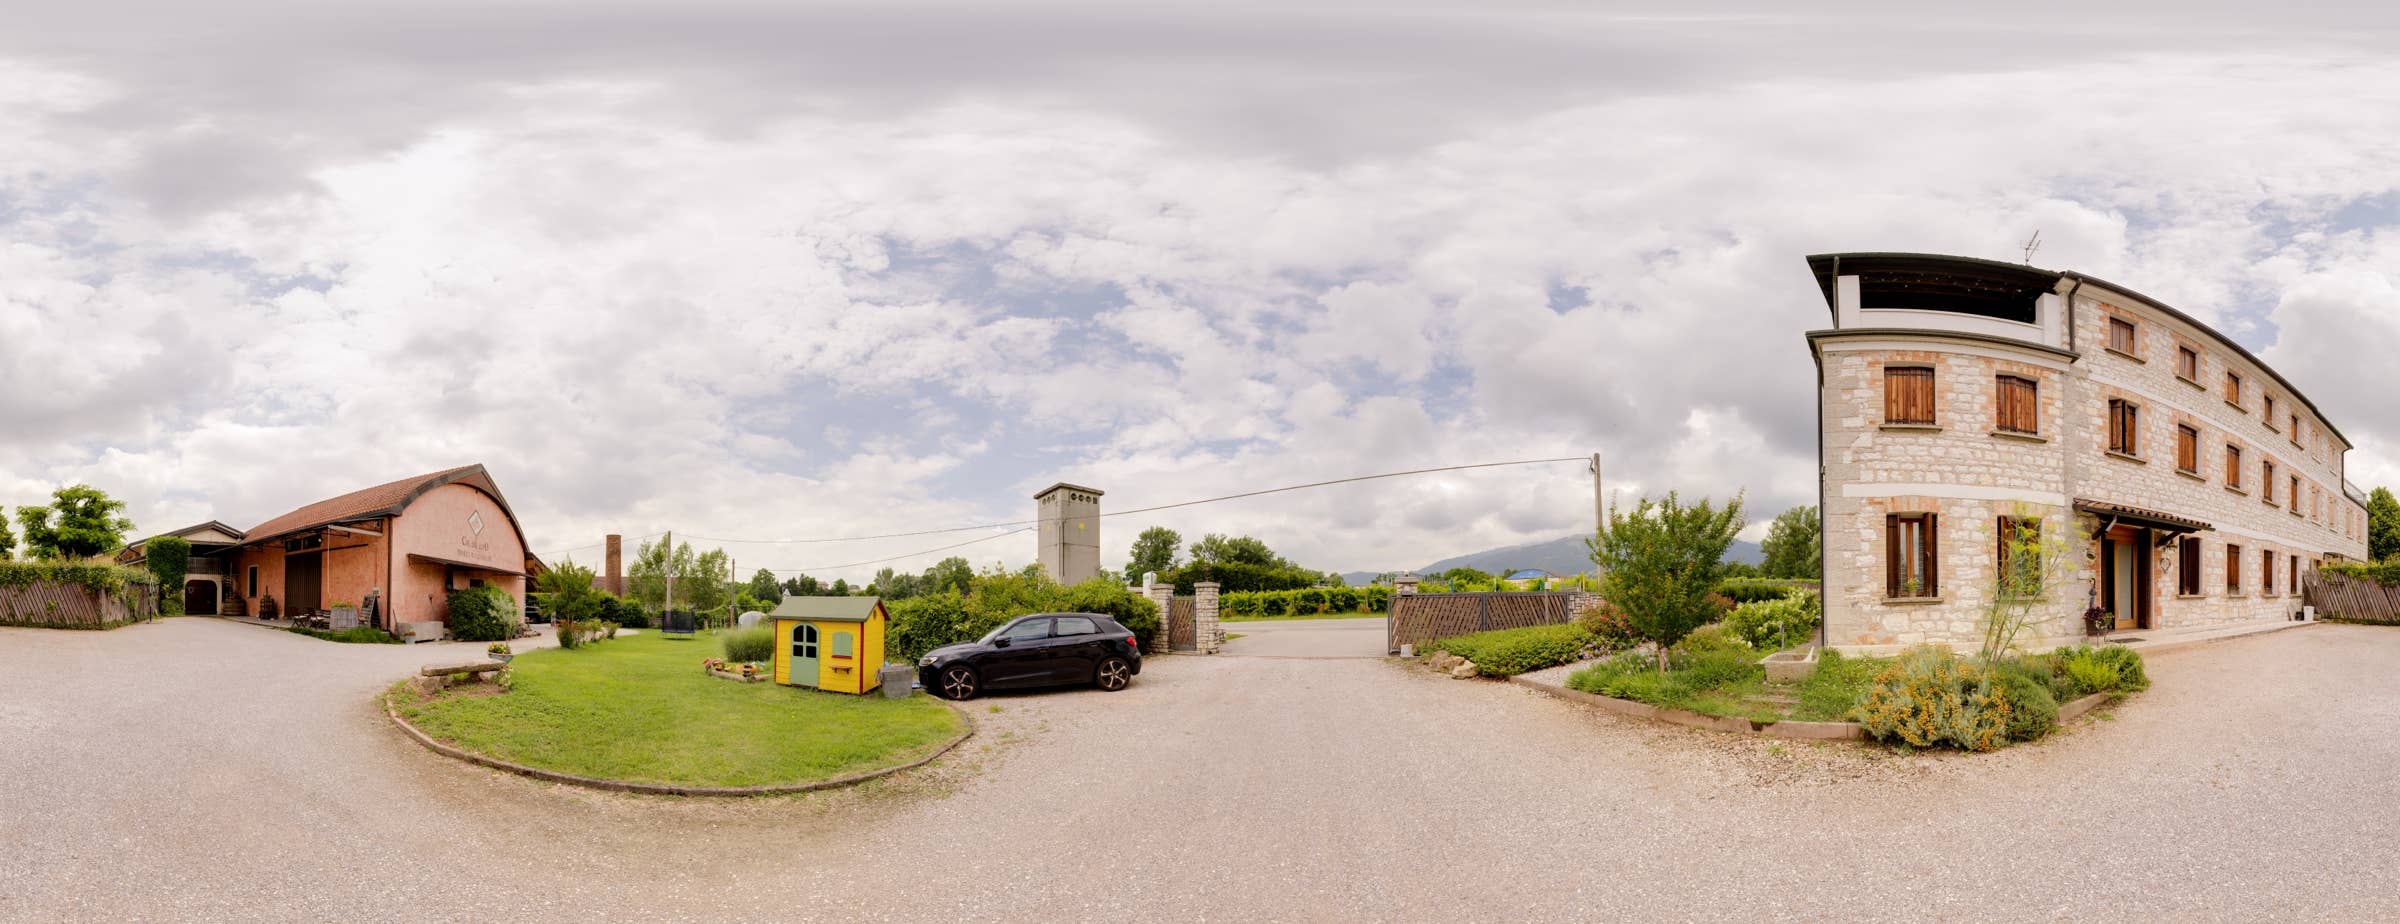 The 360° panoramic image shows the courtyard of the Col del Lupo winery. 